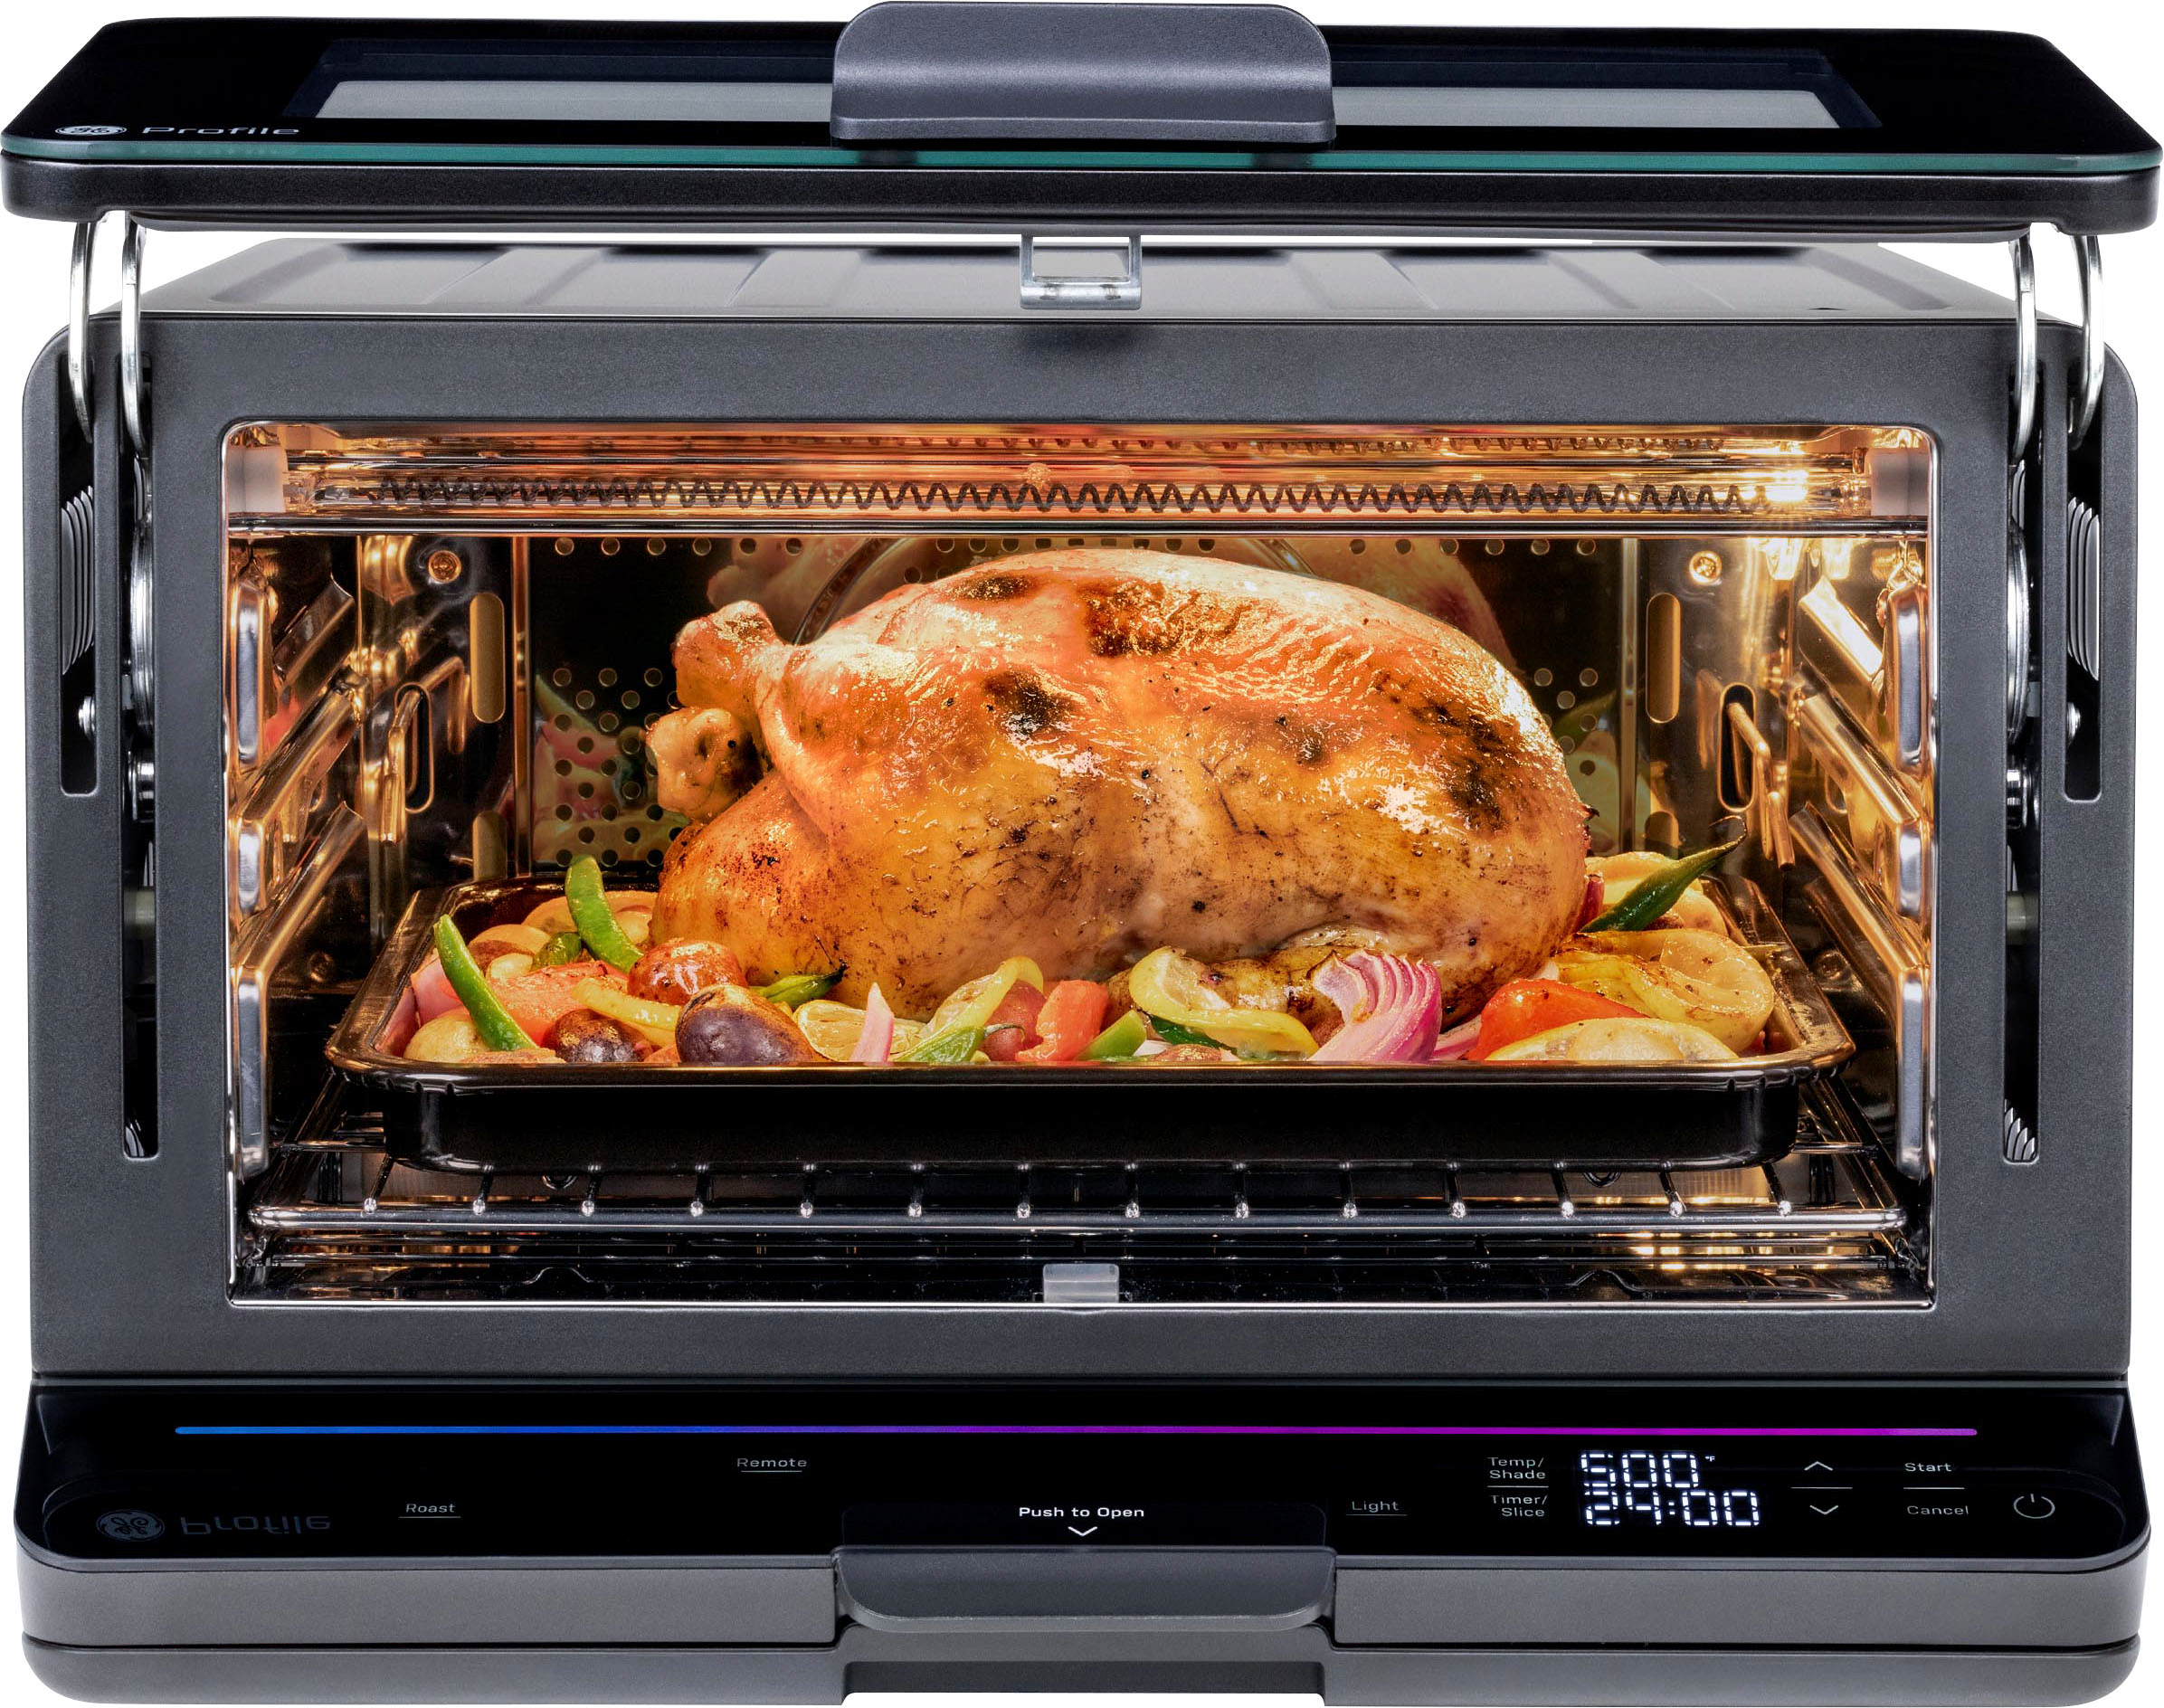 GE Profile™ Toaster Oven & Reviews